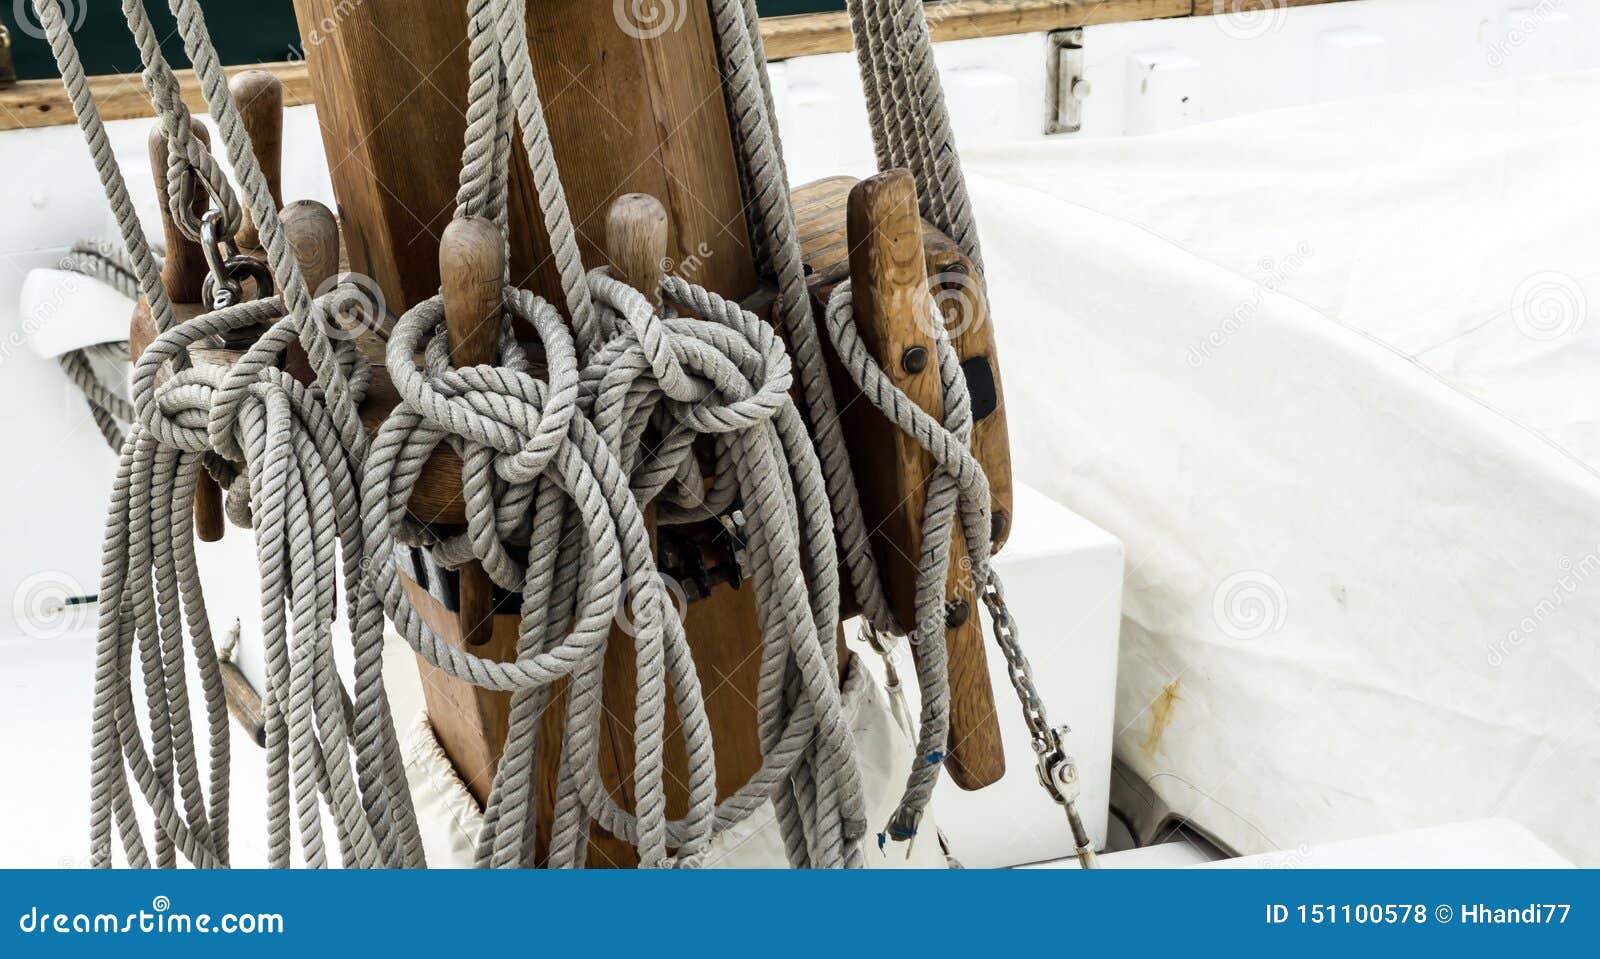 tow with knots on a ships mast